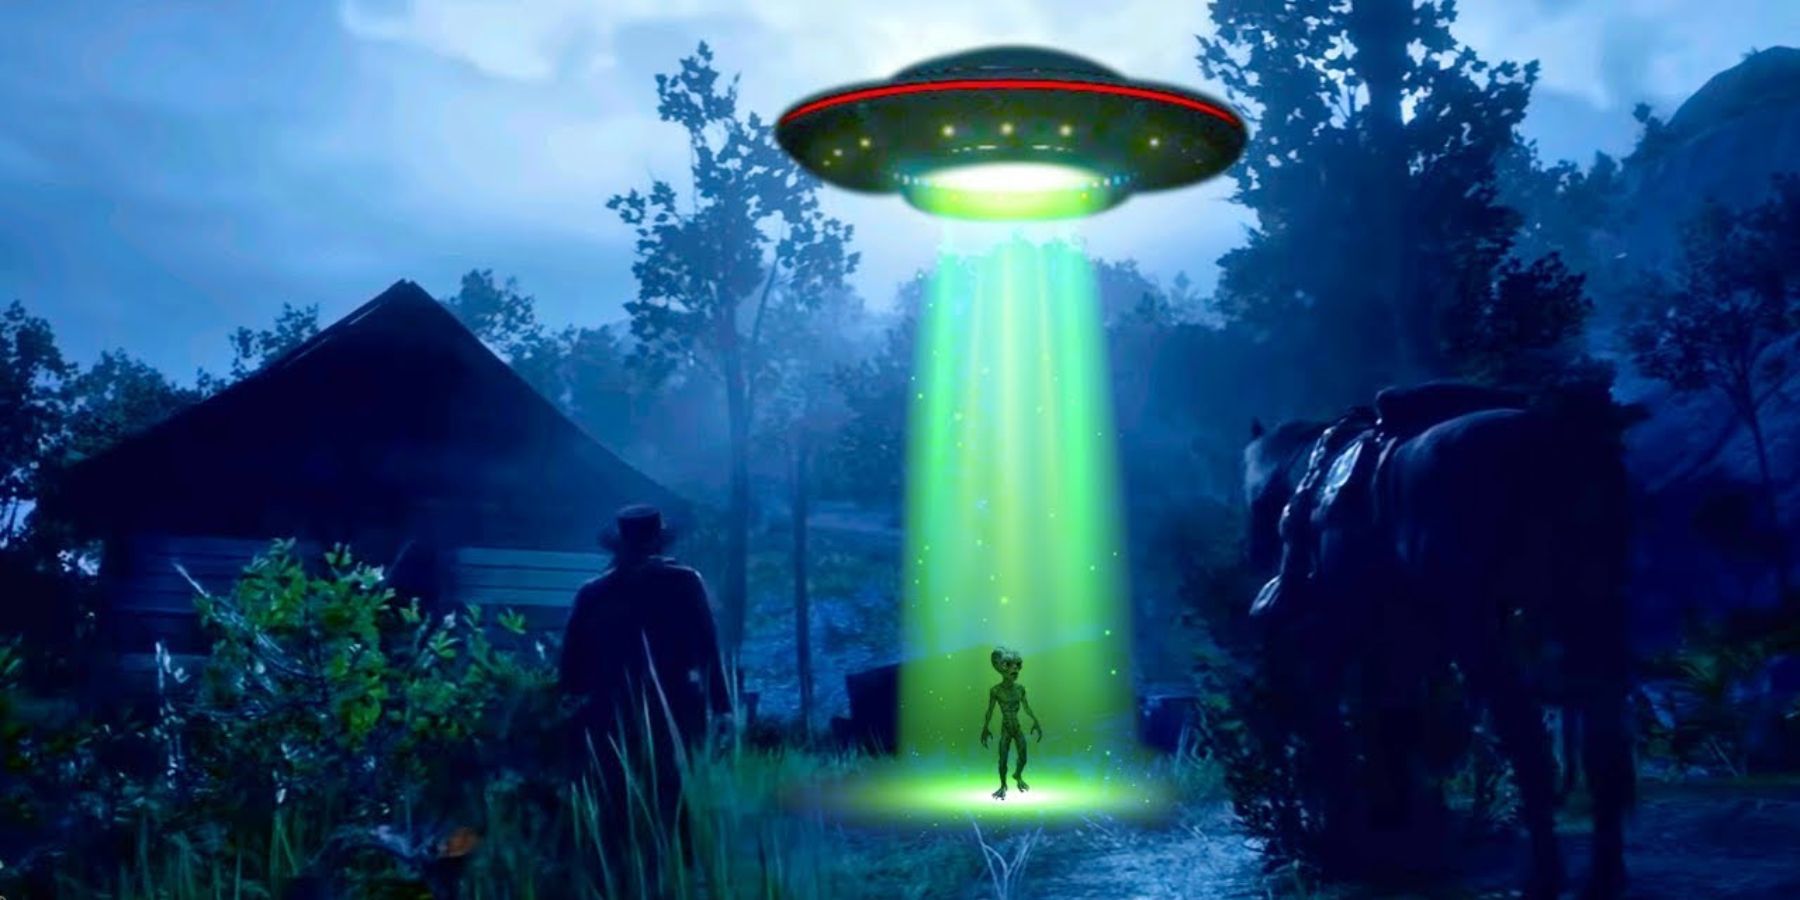 Strange Red Dead Online Clip Sees Player Transforming Into a UFO 